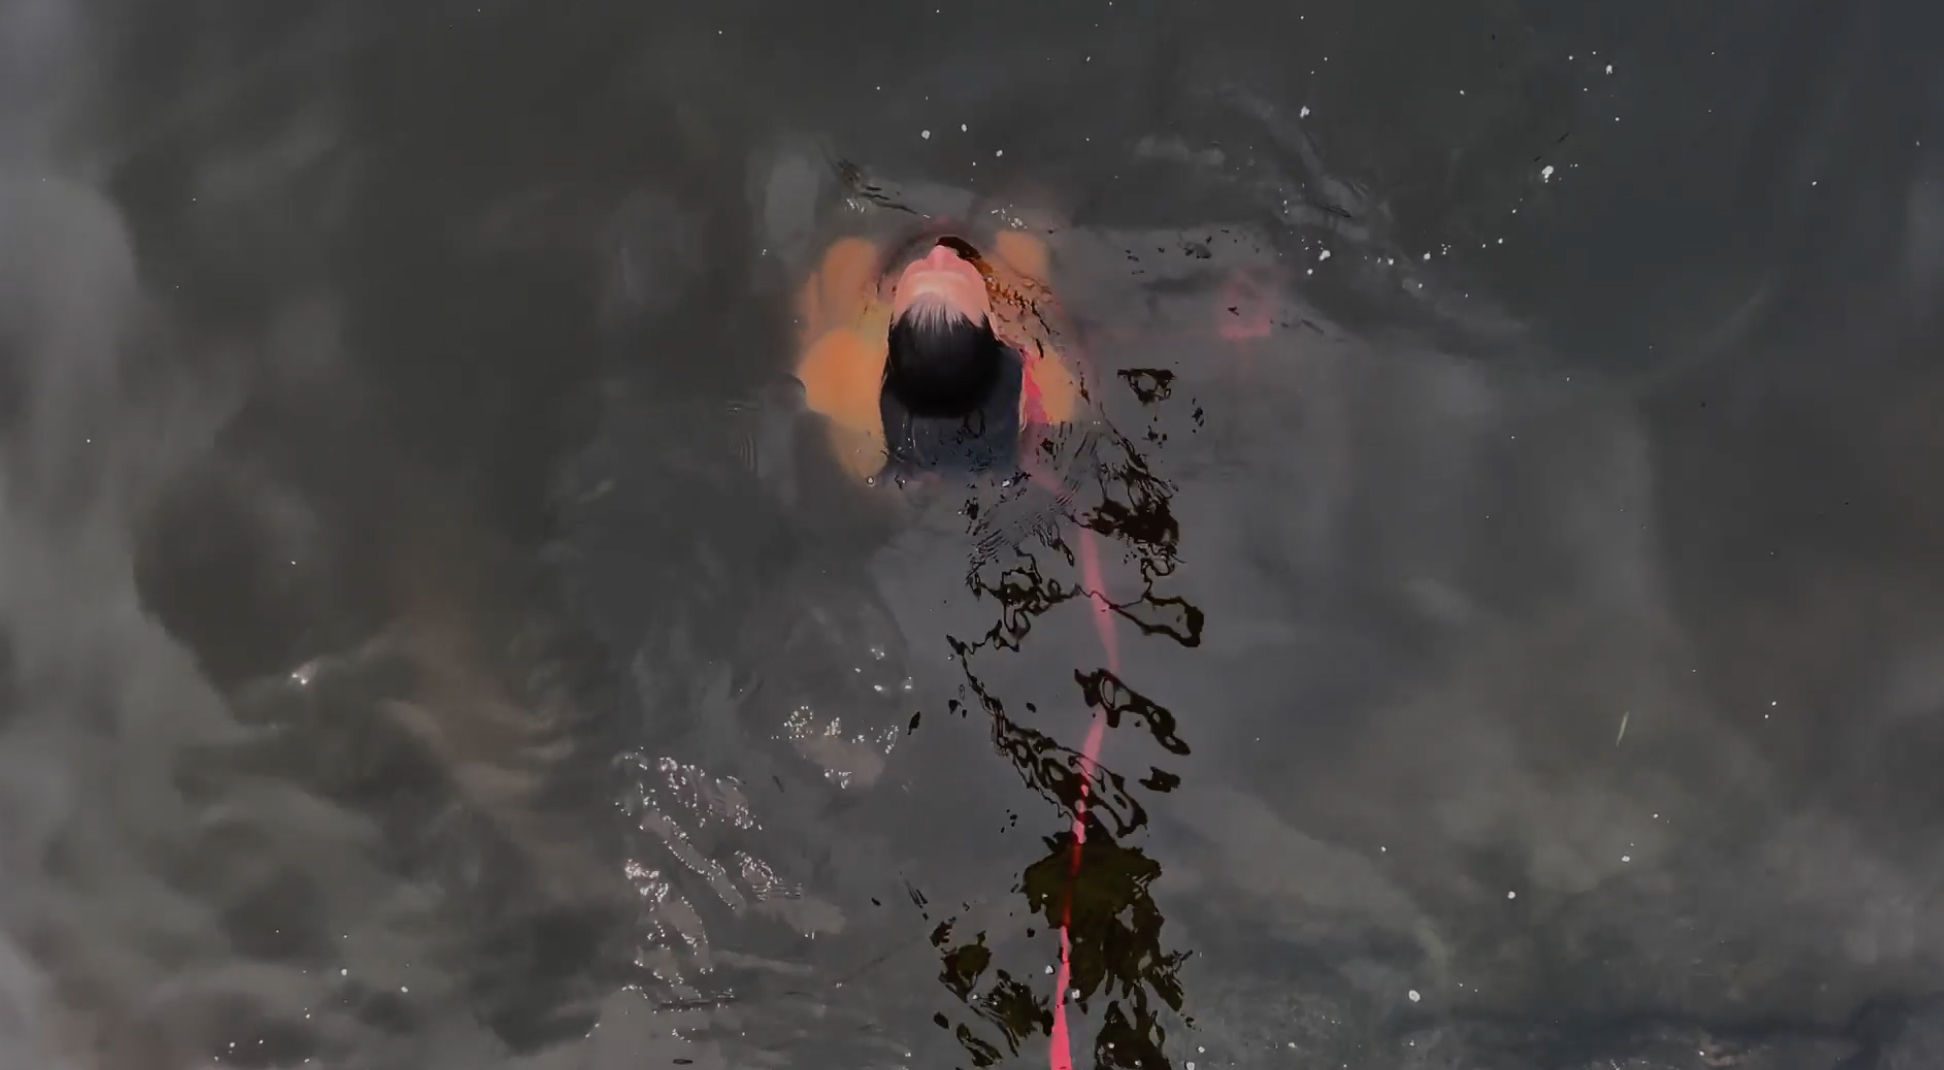 Aerial view of naked person with bright pink ribbon submerged in dark water with head emerging